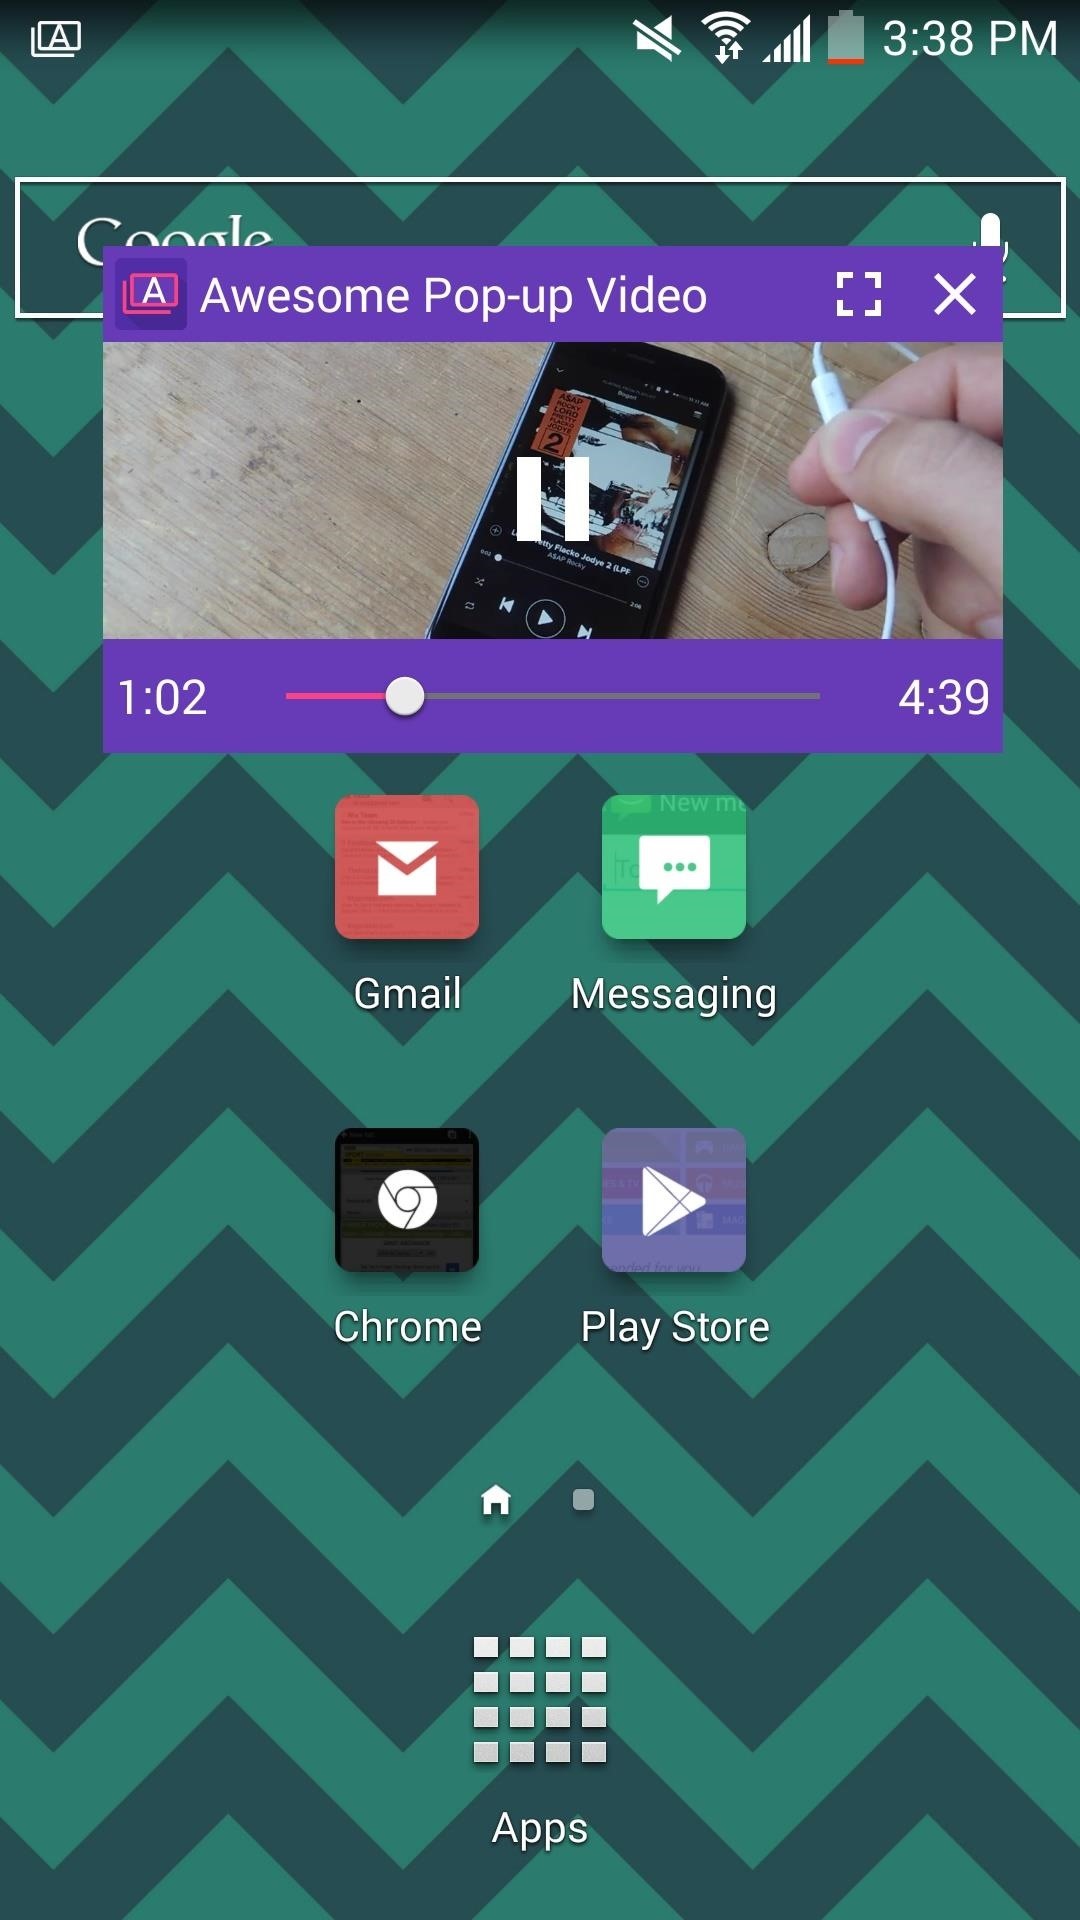 Float Videos from Facebook, YouTube, Vimeo, & Other Media Sites Anywhere on Android